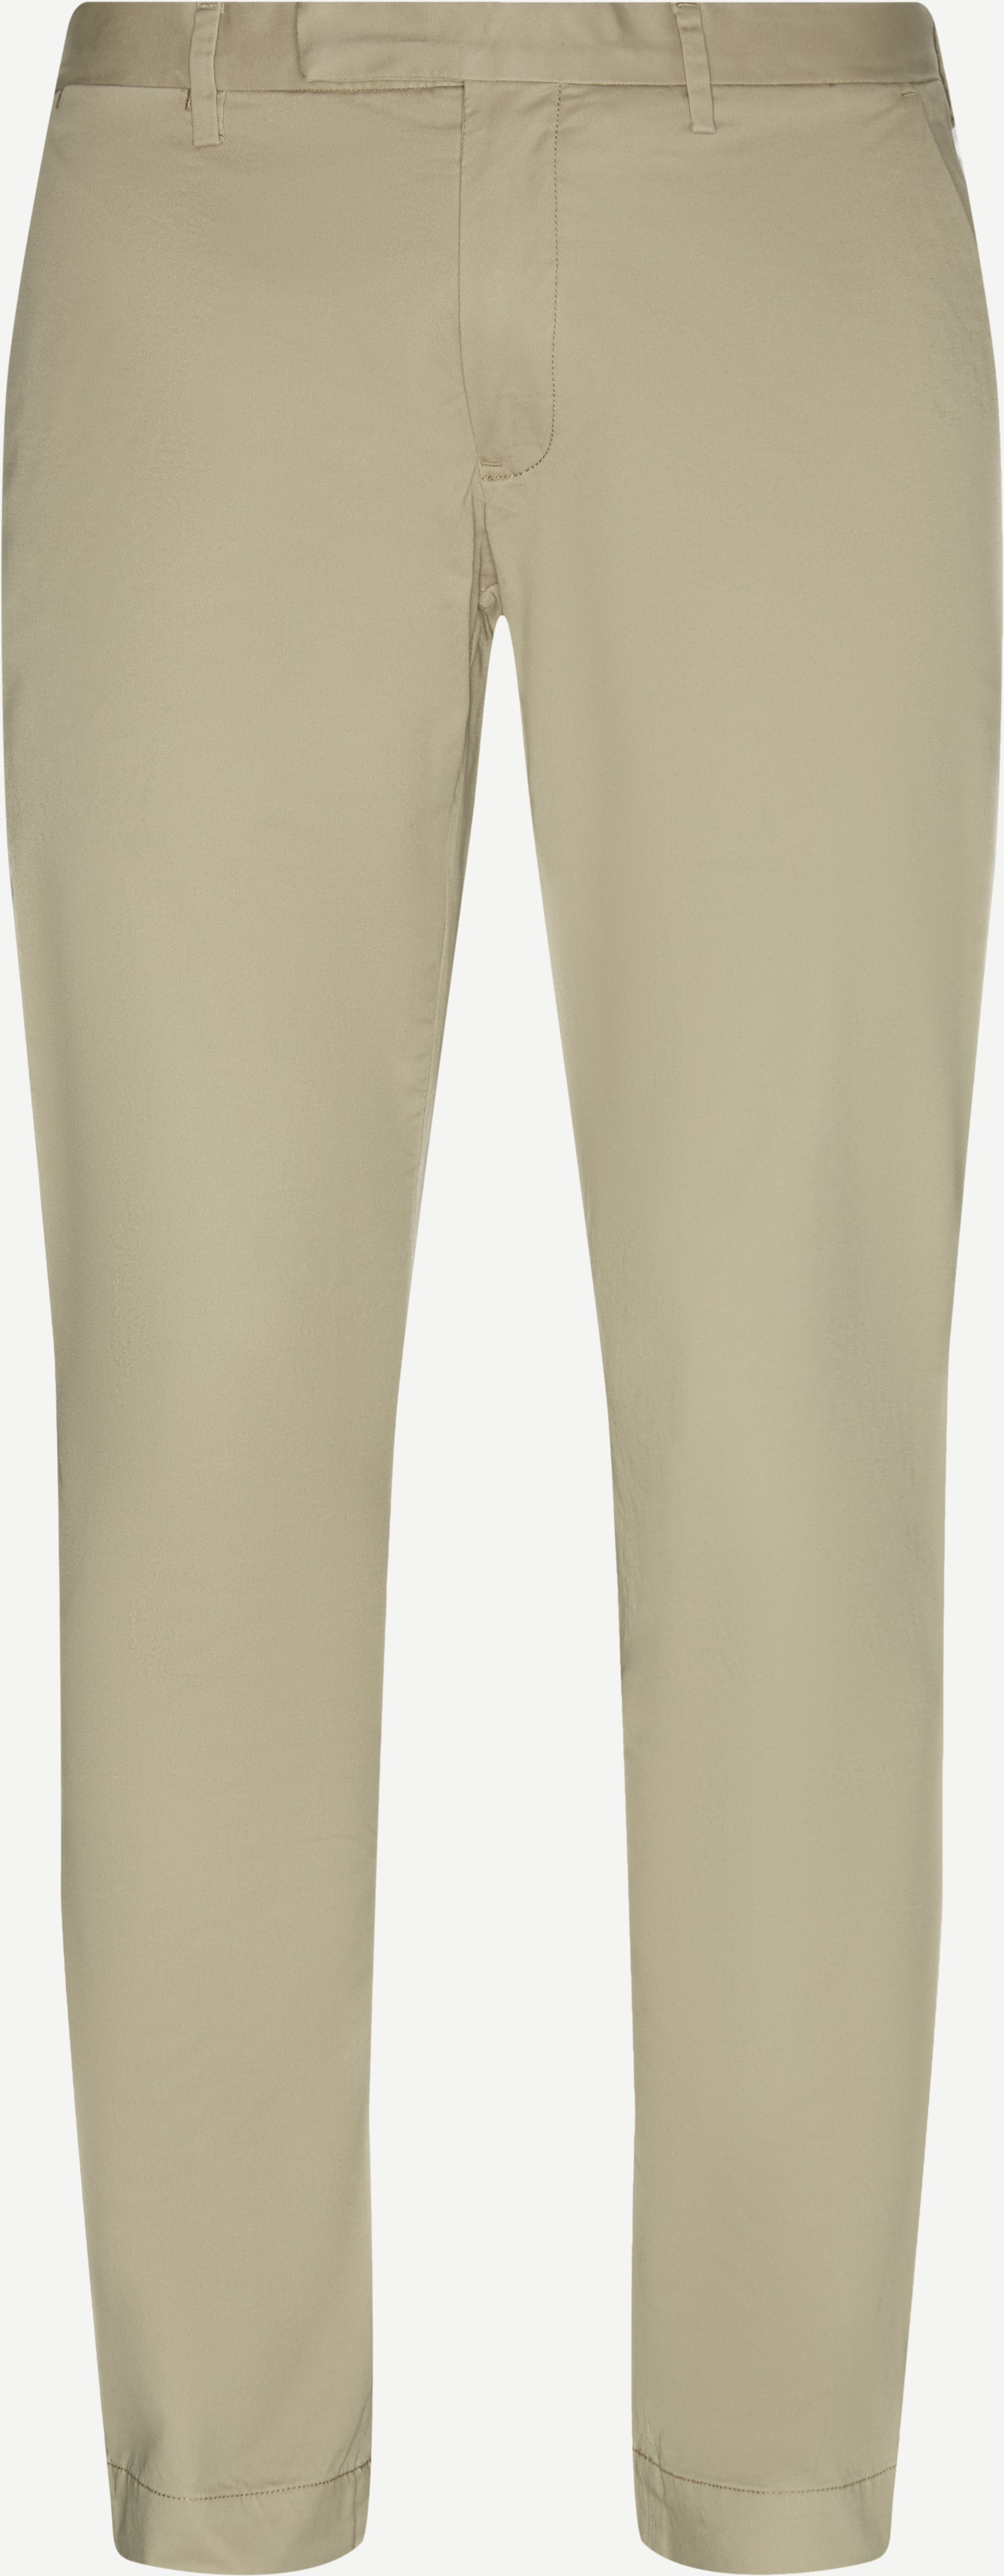 Cotton Stretch Chino - Trousers - Slim fit - Sand